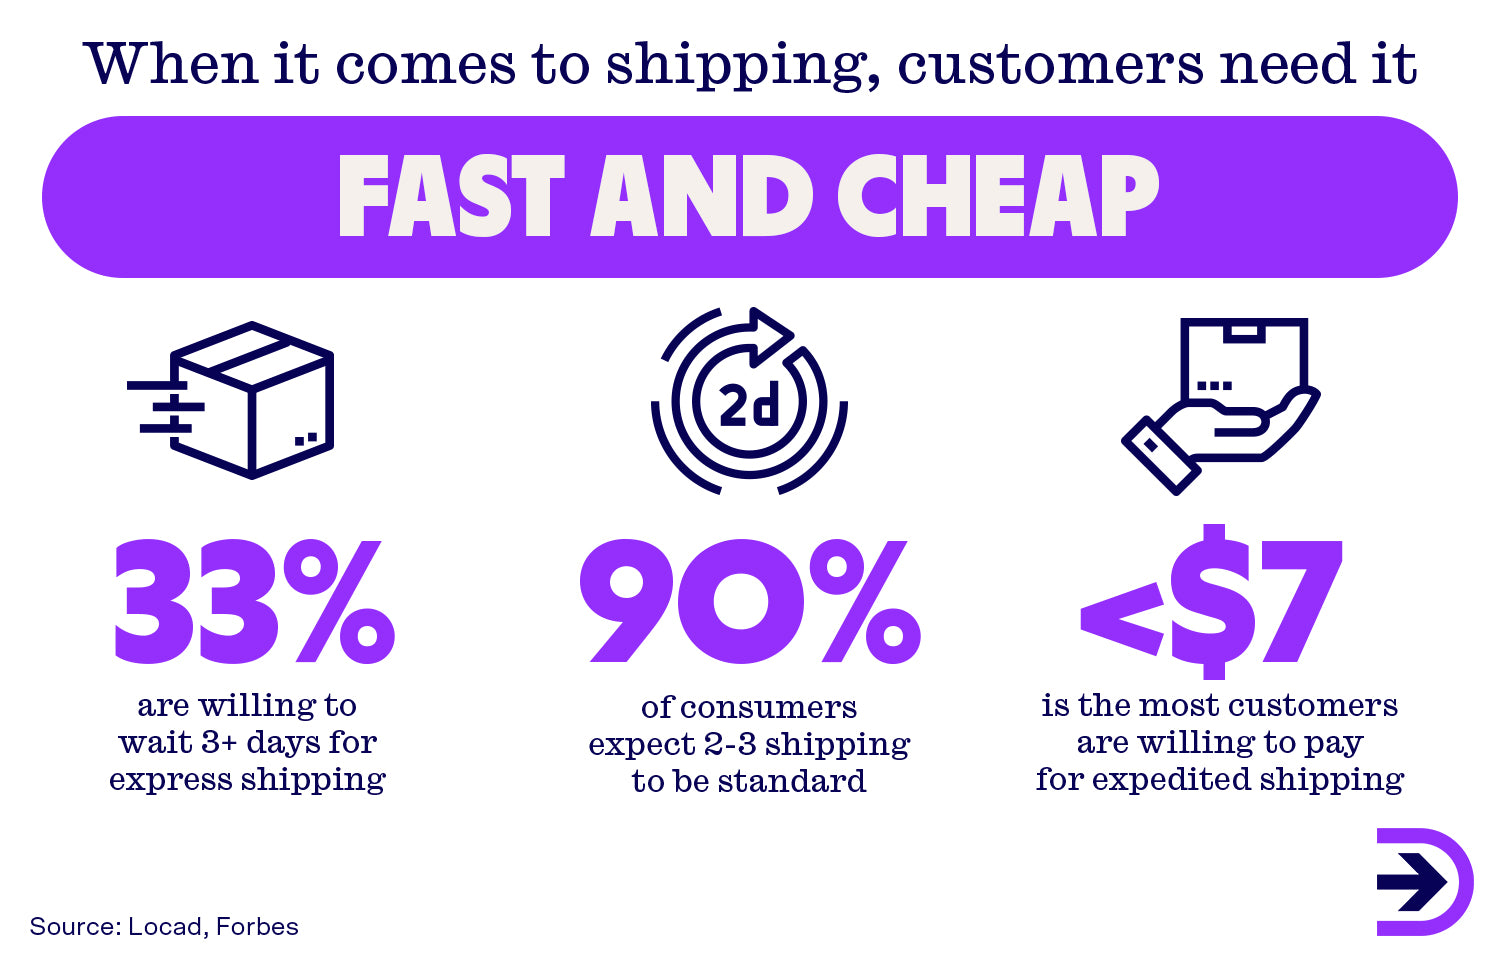 Customers want their online orders fast and cheap with only a third of customers willing to wait over 3 days for express shipping.